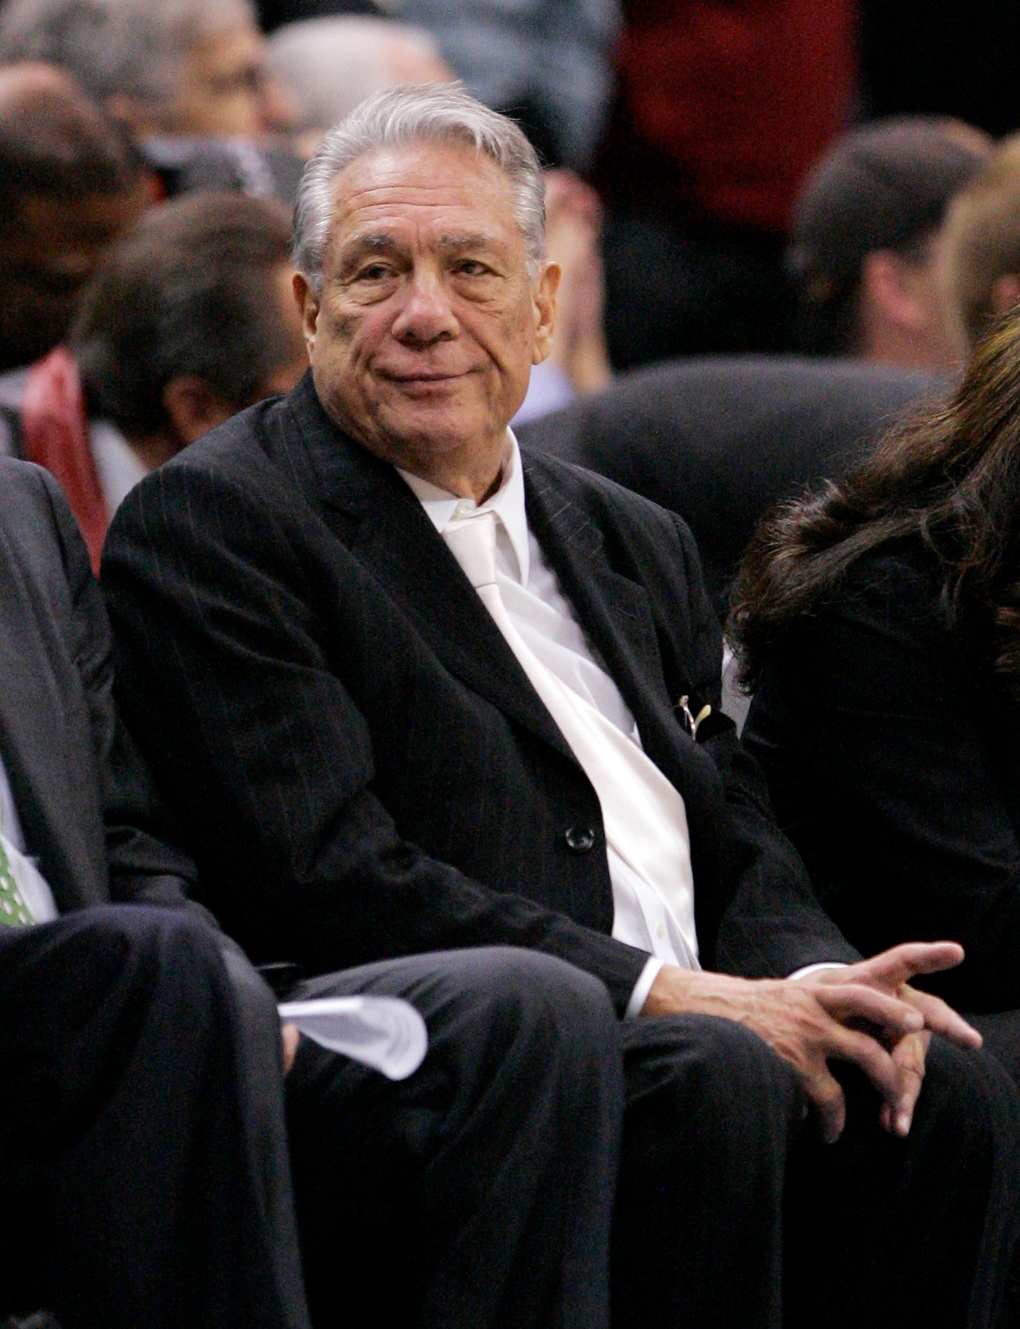 Son of Clippers owner Donald Sterling found dead